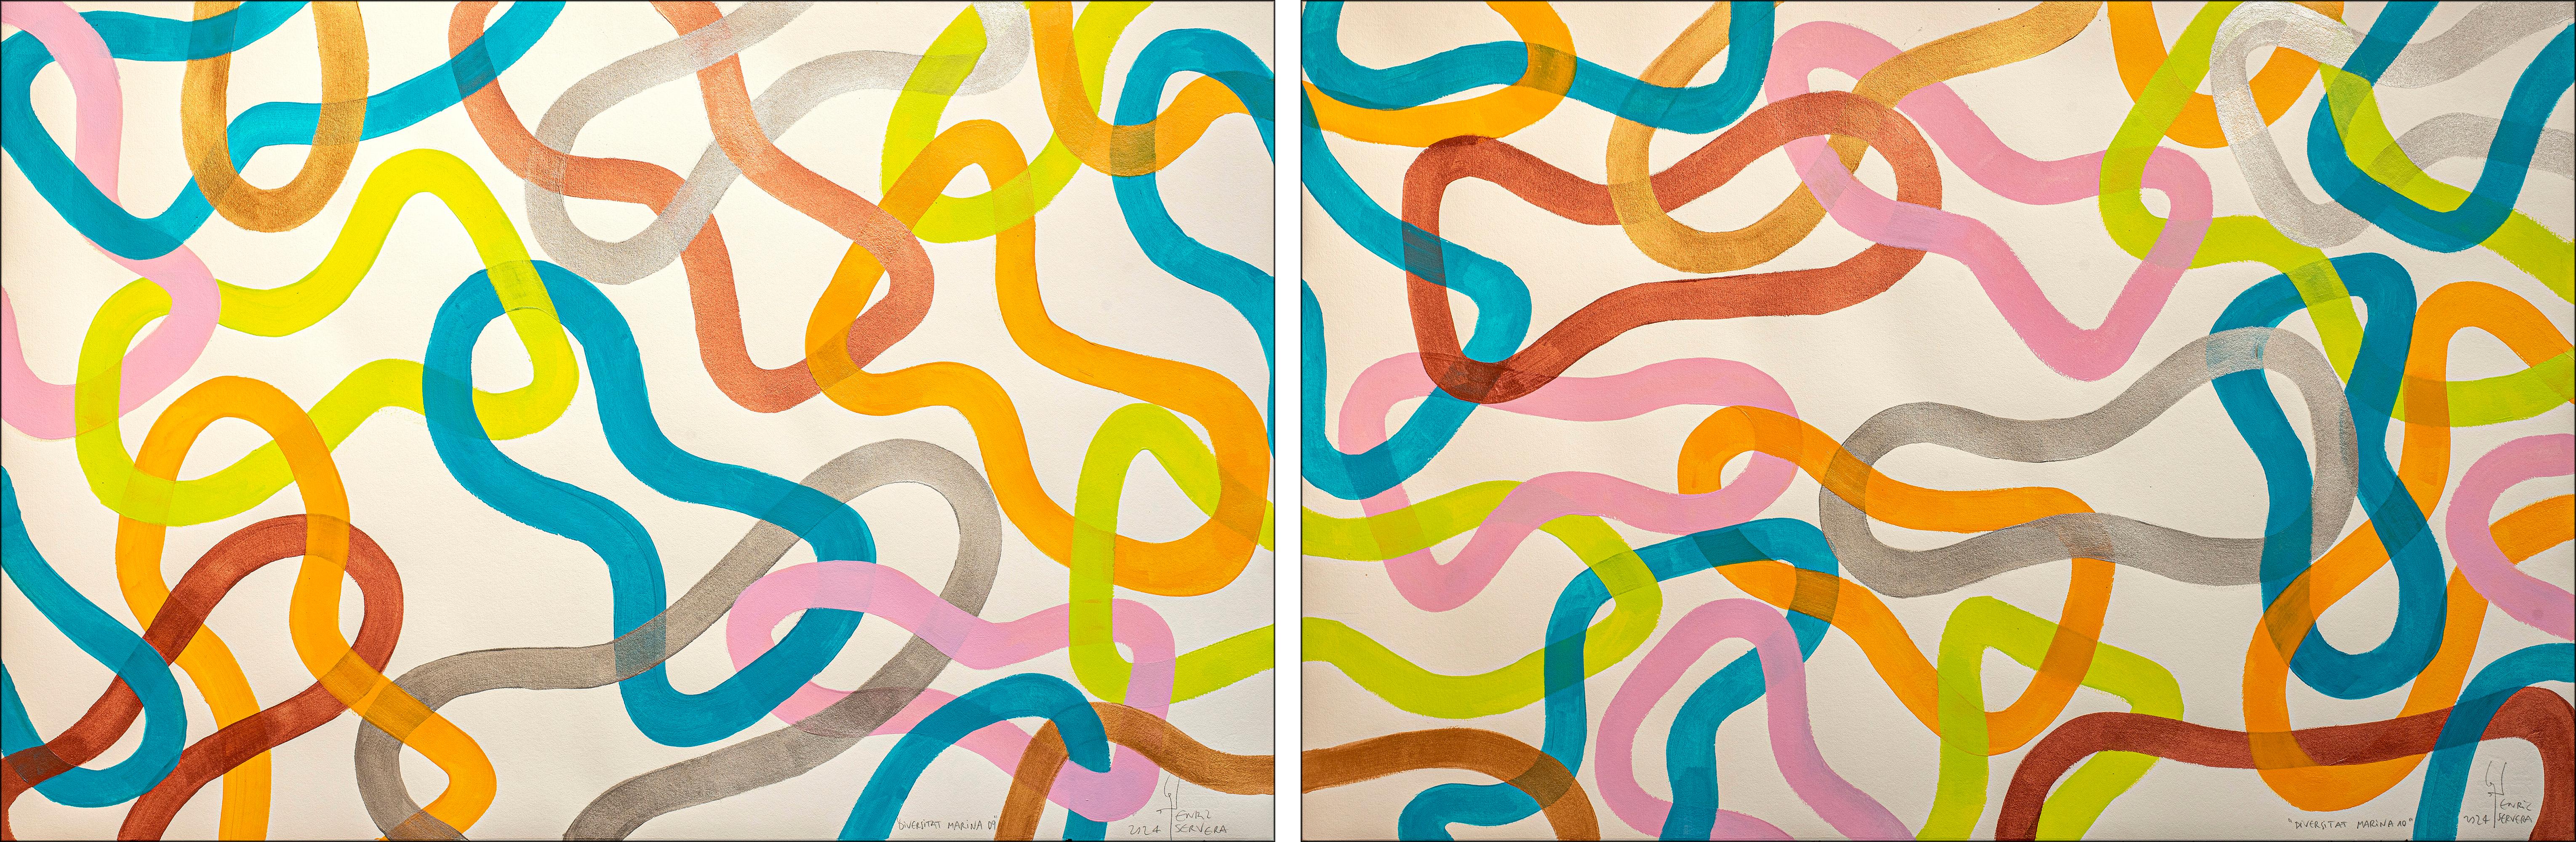 Marine Diversity Diptych, Abstract Colourful Fish Patterns, Vivid Tones Gestures